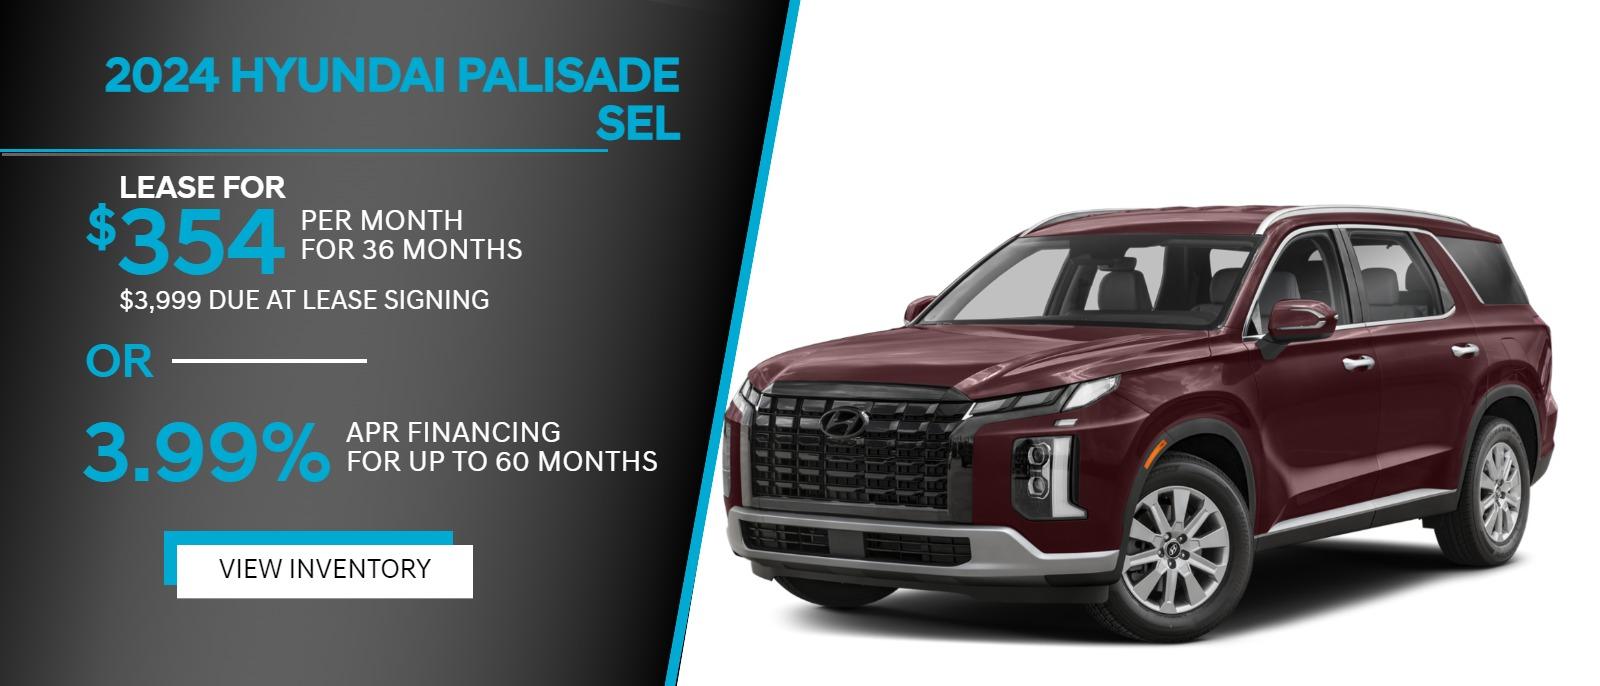 2024 PALISADE SEL
$354/mo
For 36 months with $3,999 due at lease signing
3.99% APR
Financing for up to 60 months